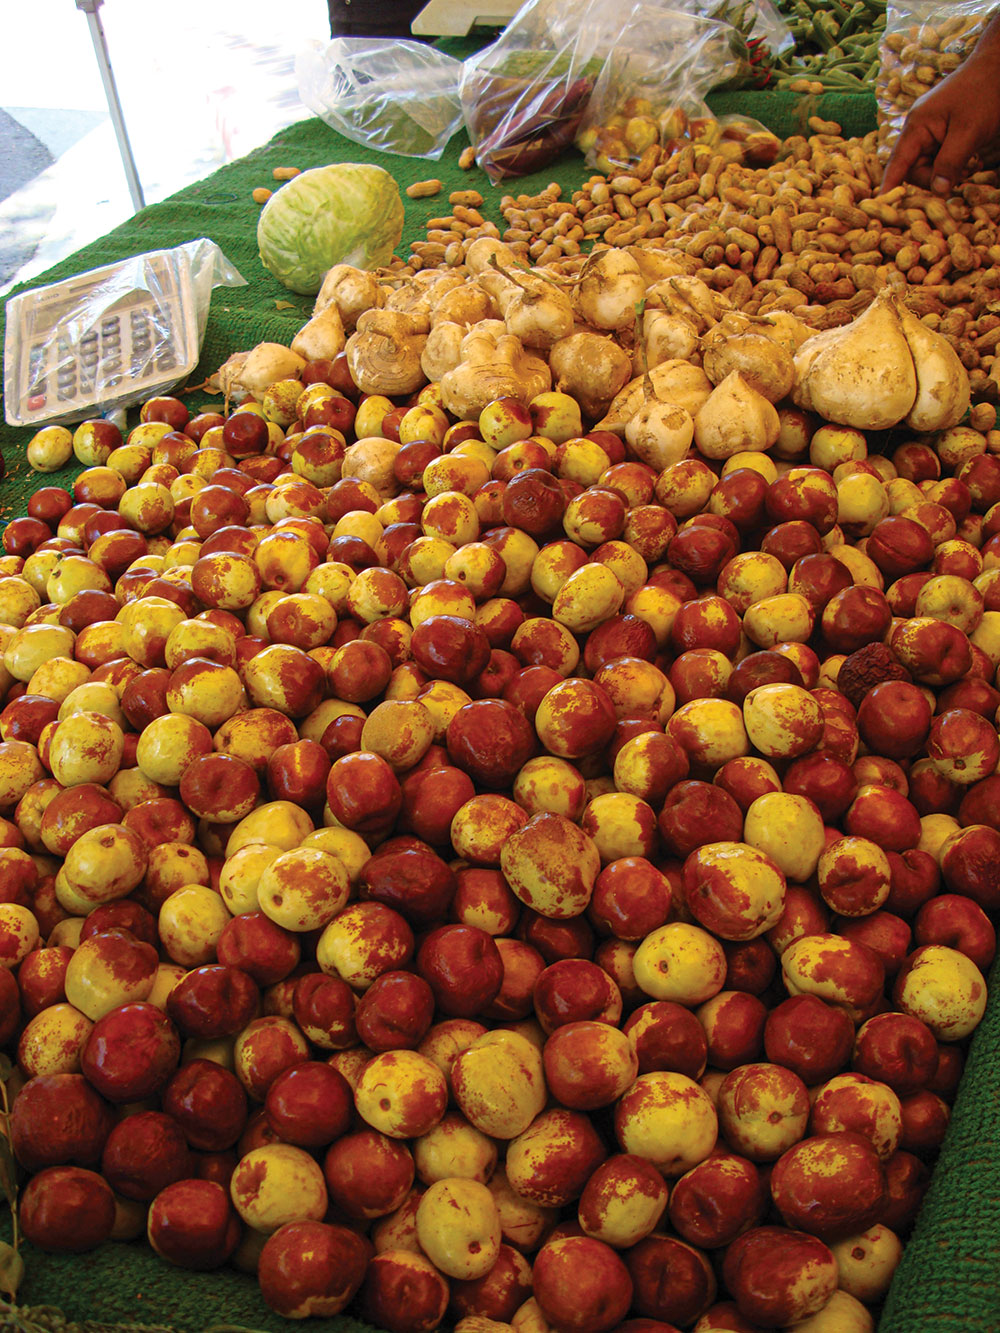 Jujube fruits from a farmers market